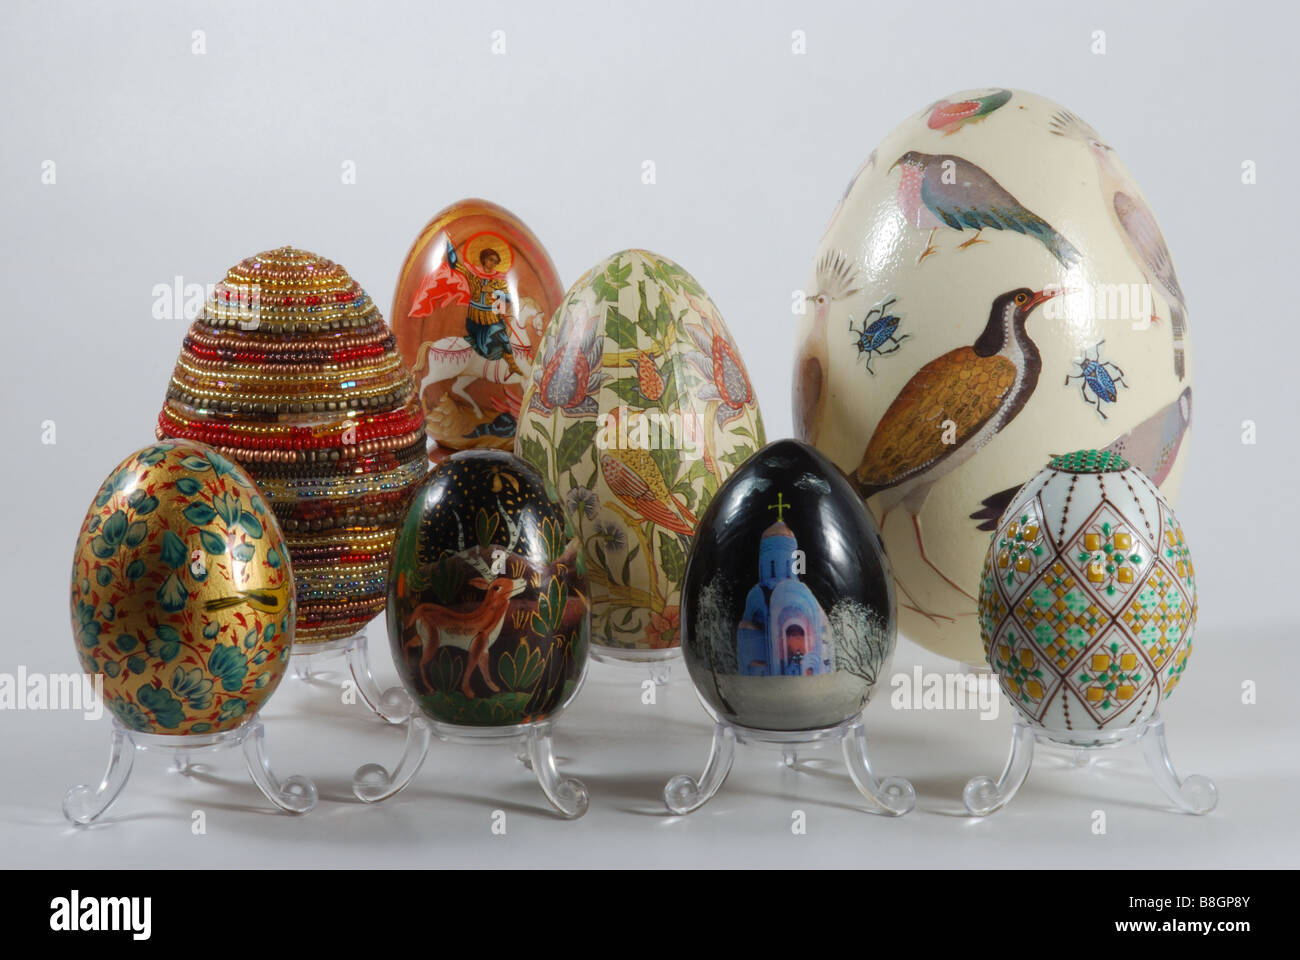 Collection of hand painted eggshells Stock Photo